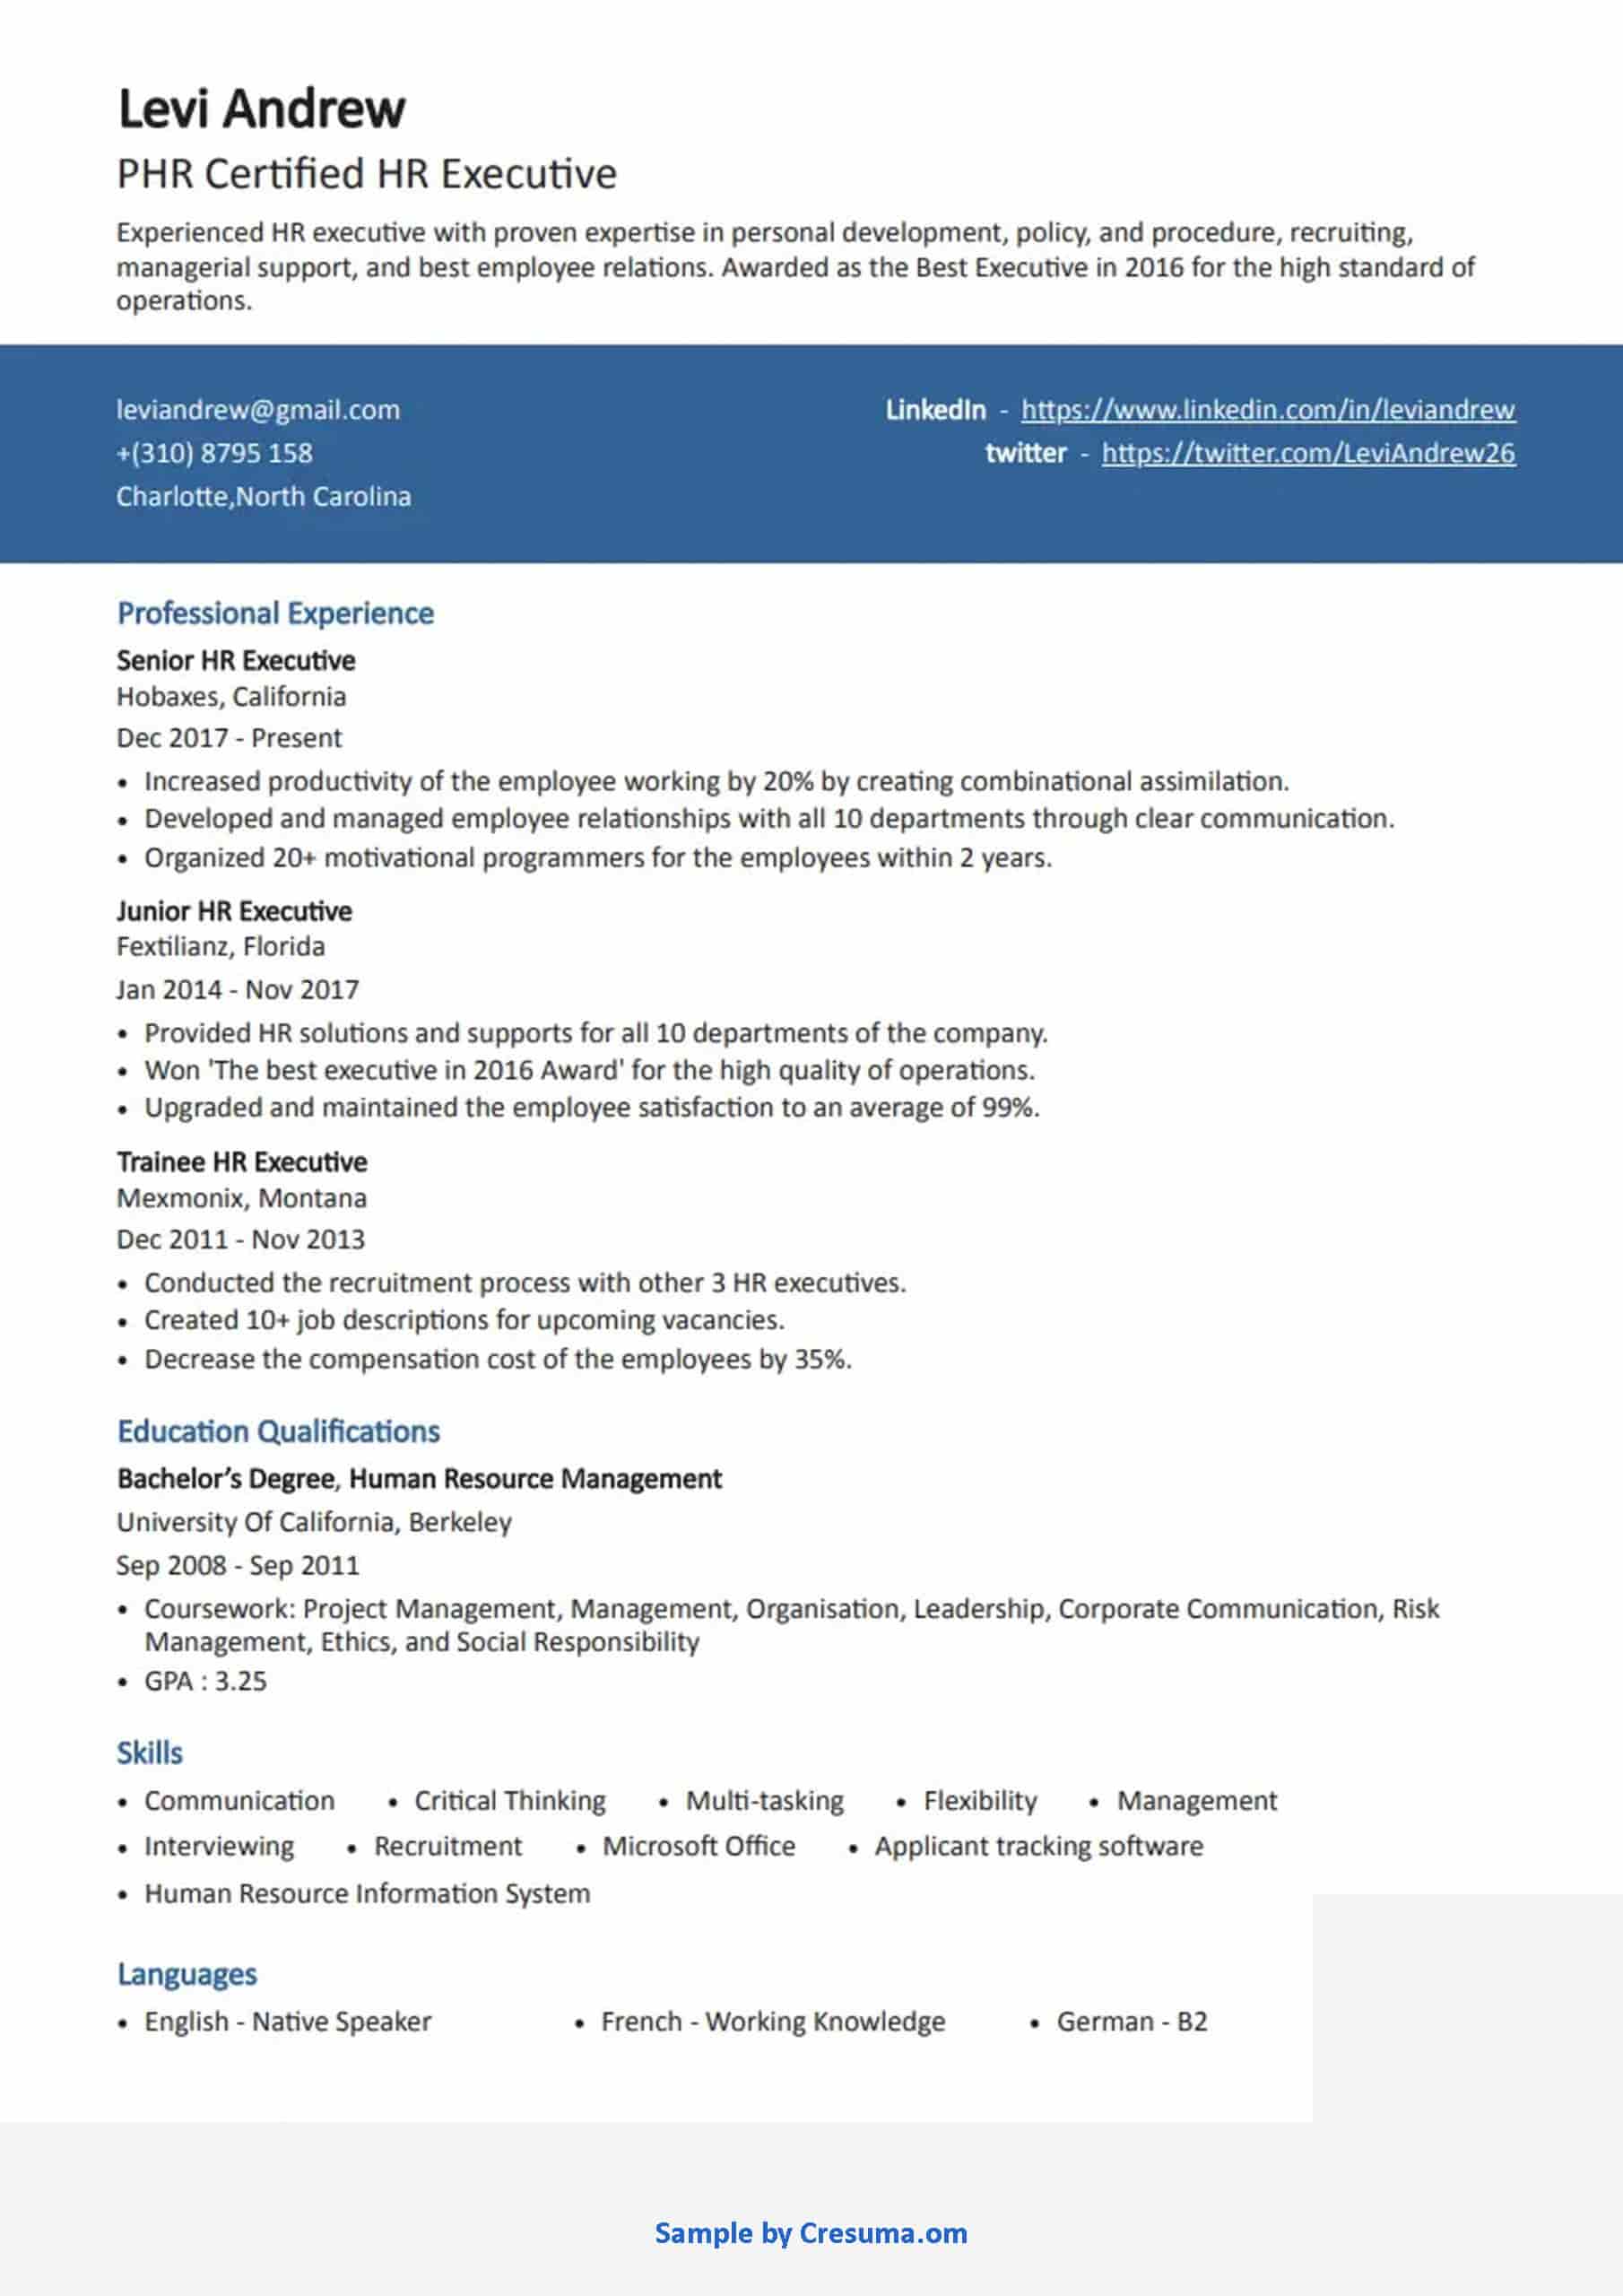 resume format download for hr executive